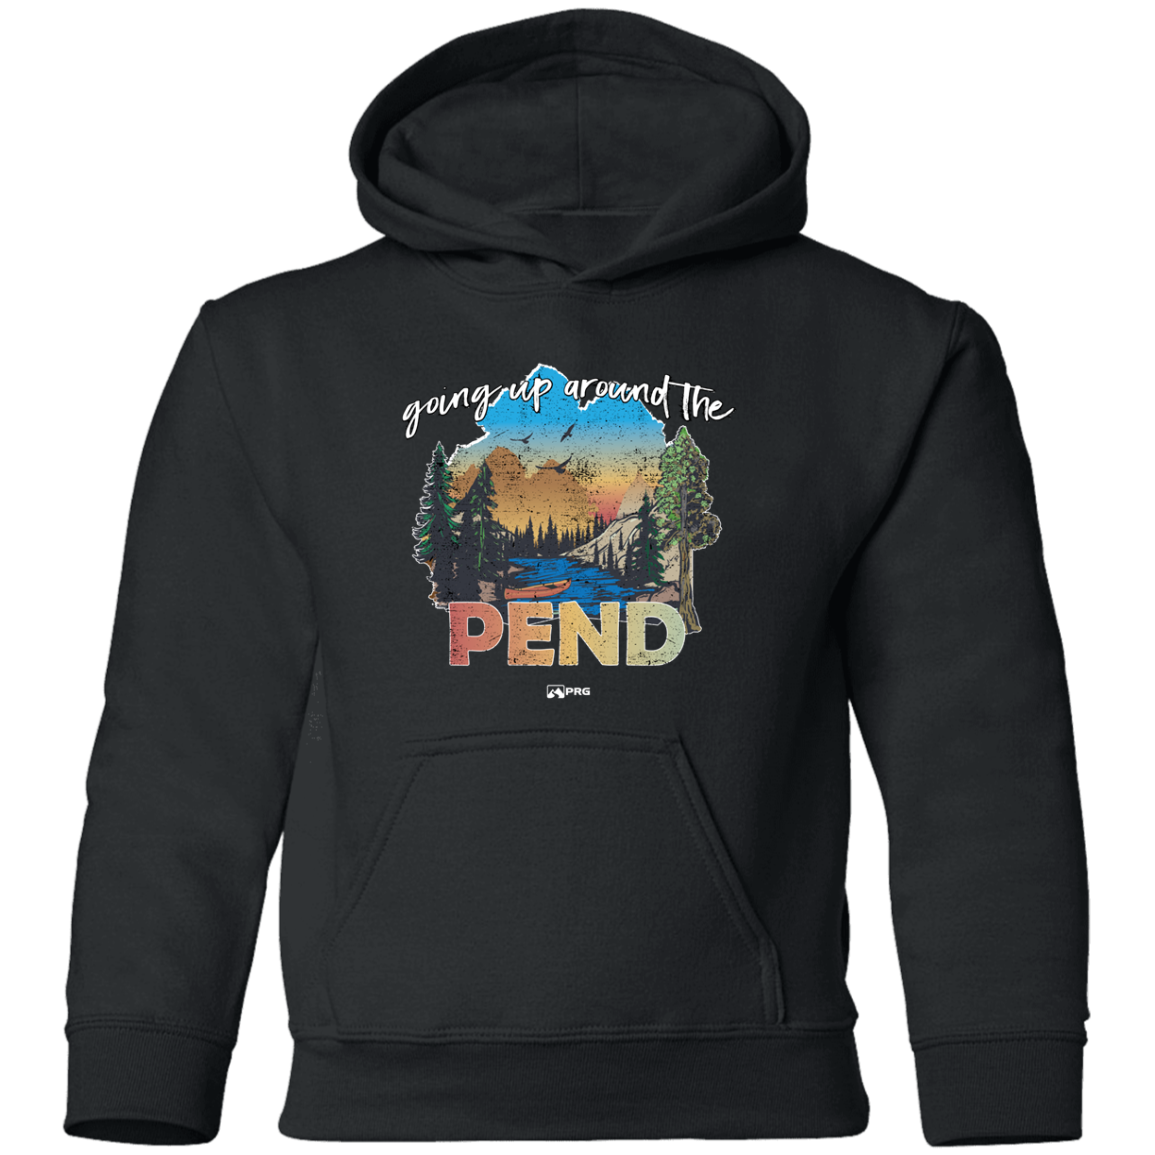 Around the Pend - Youth Hoodie